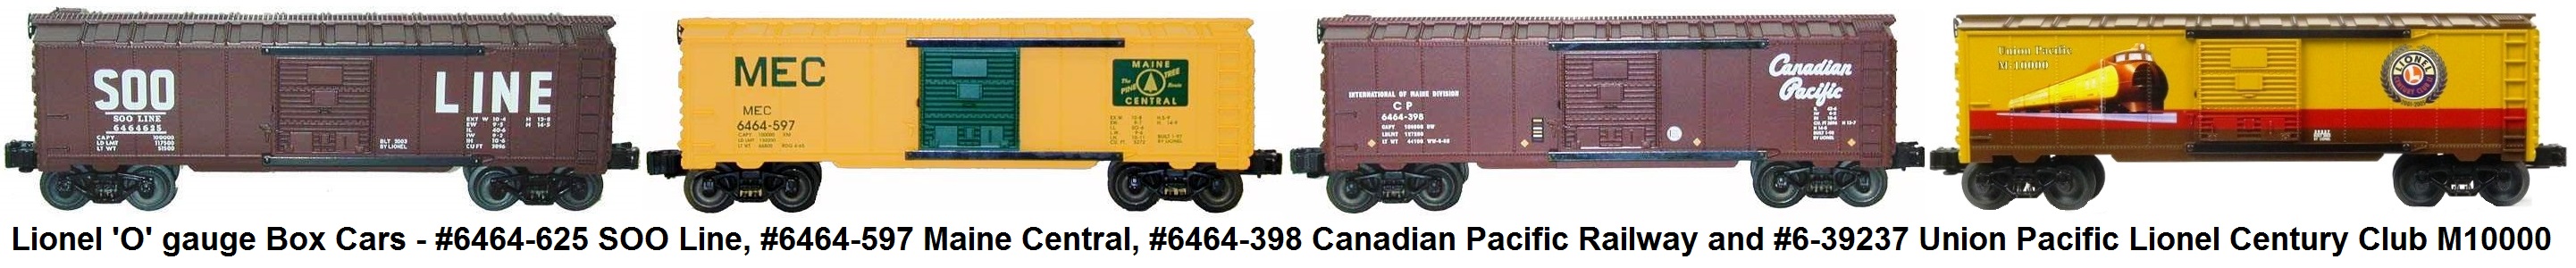 Lionel 'O' gauge #6464-625 SOO Line, #6464-597 Maine Central, #6464-398 Canadian Pacific and #6-39237 Union Pacific Lionel Century Club M10000 Box Cars